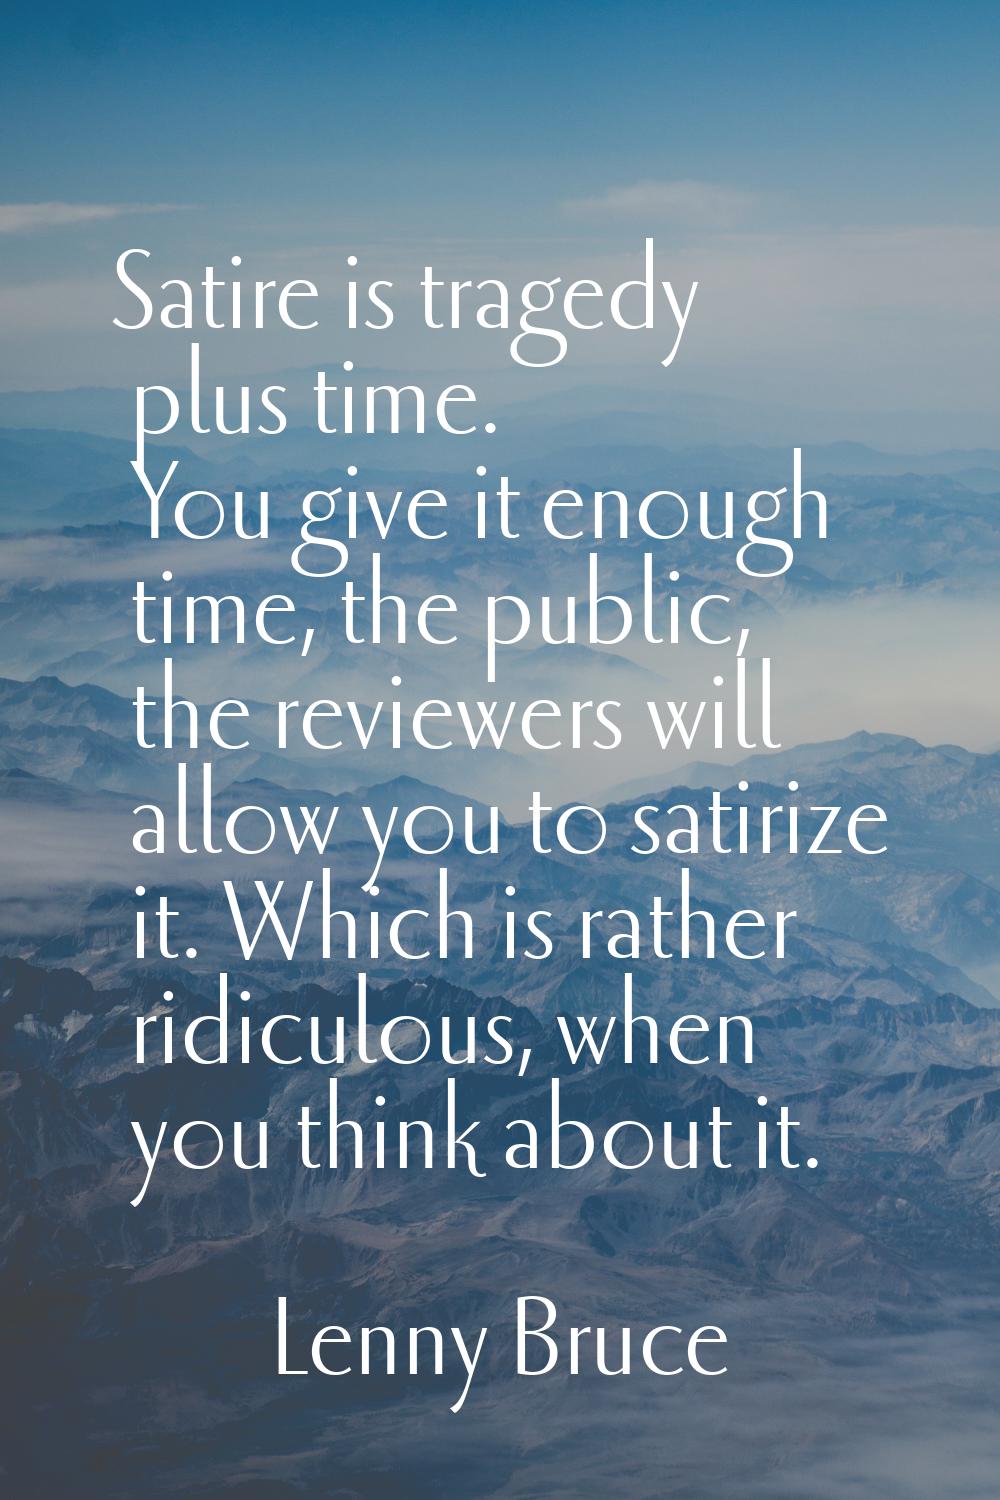 Satire is tragedy plus time. You give it enough time, the public, the reviewers will allow you to s